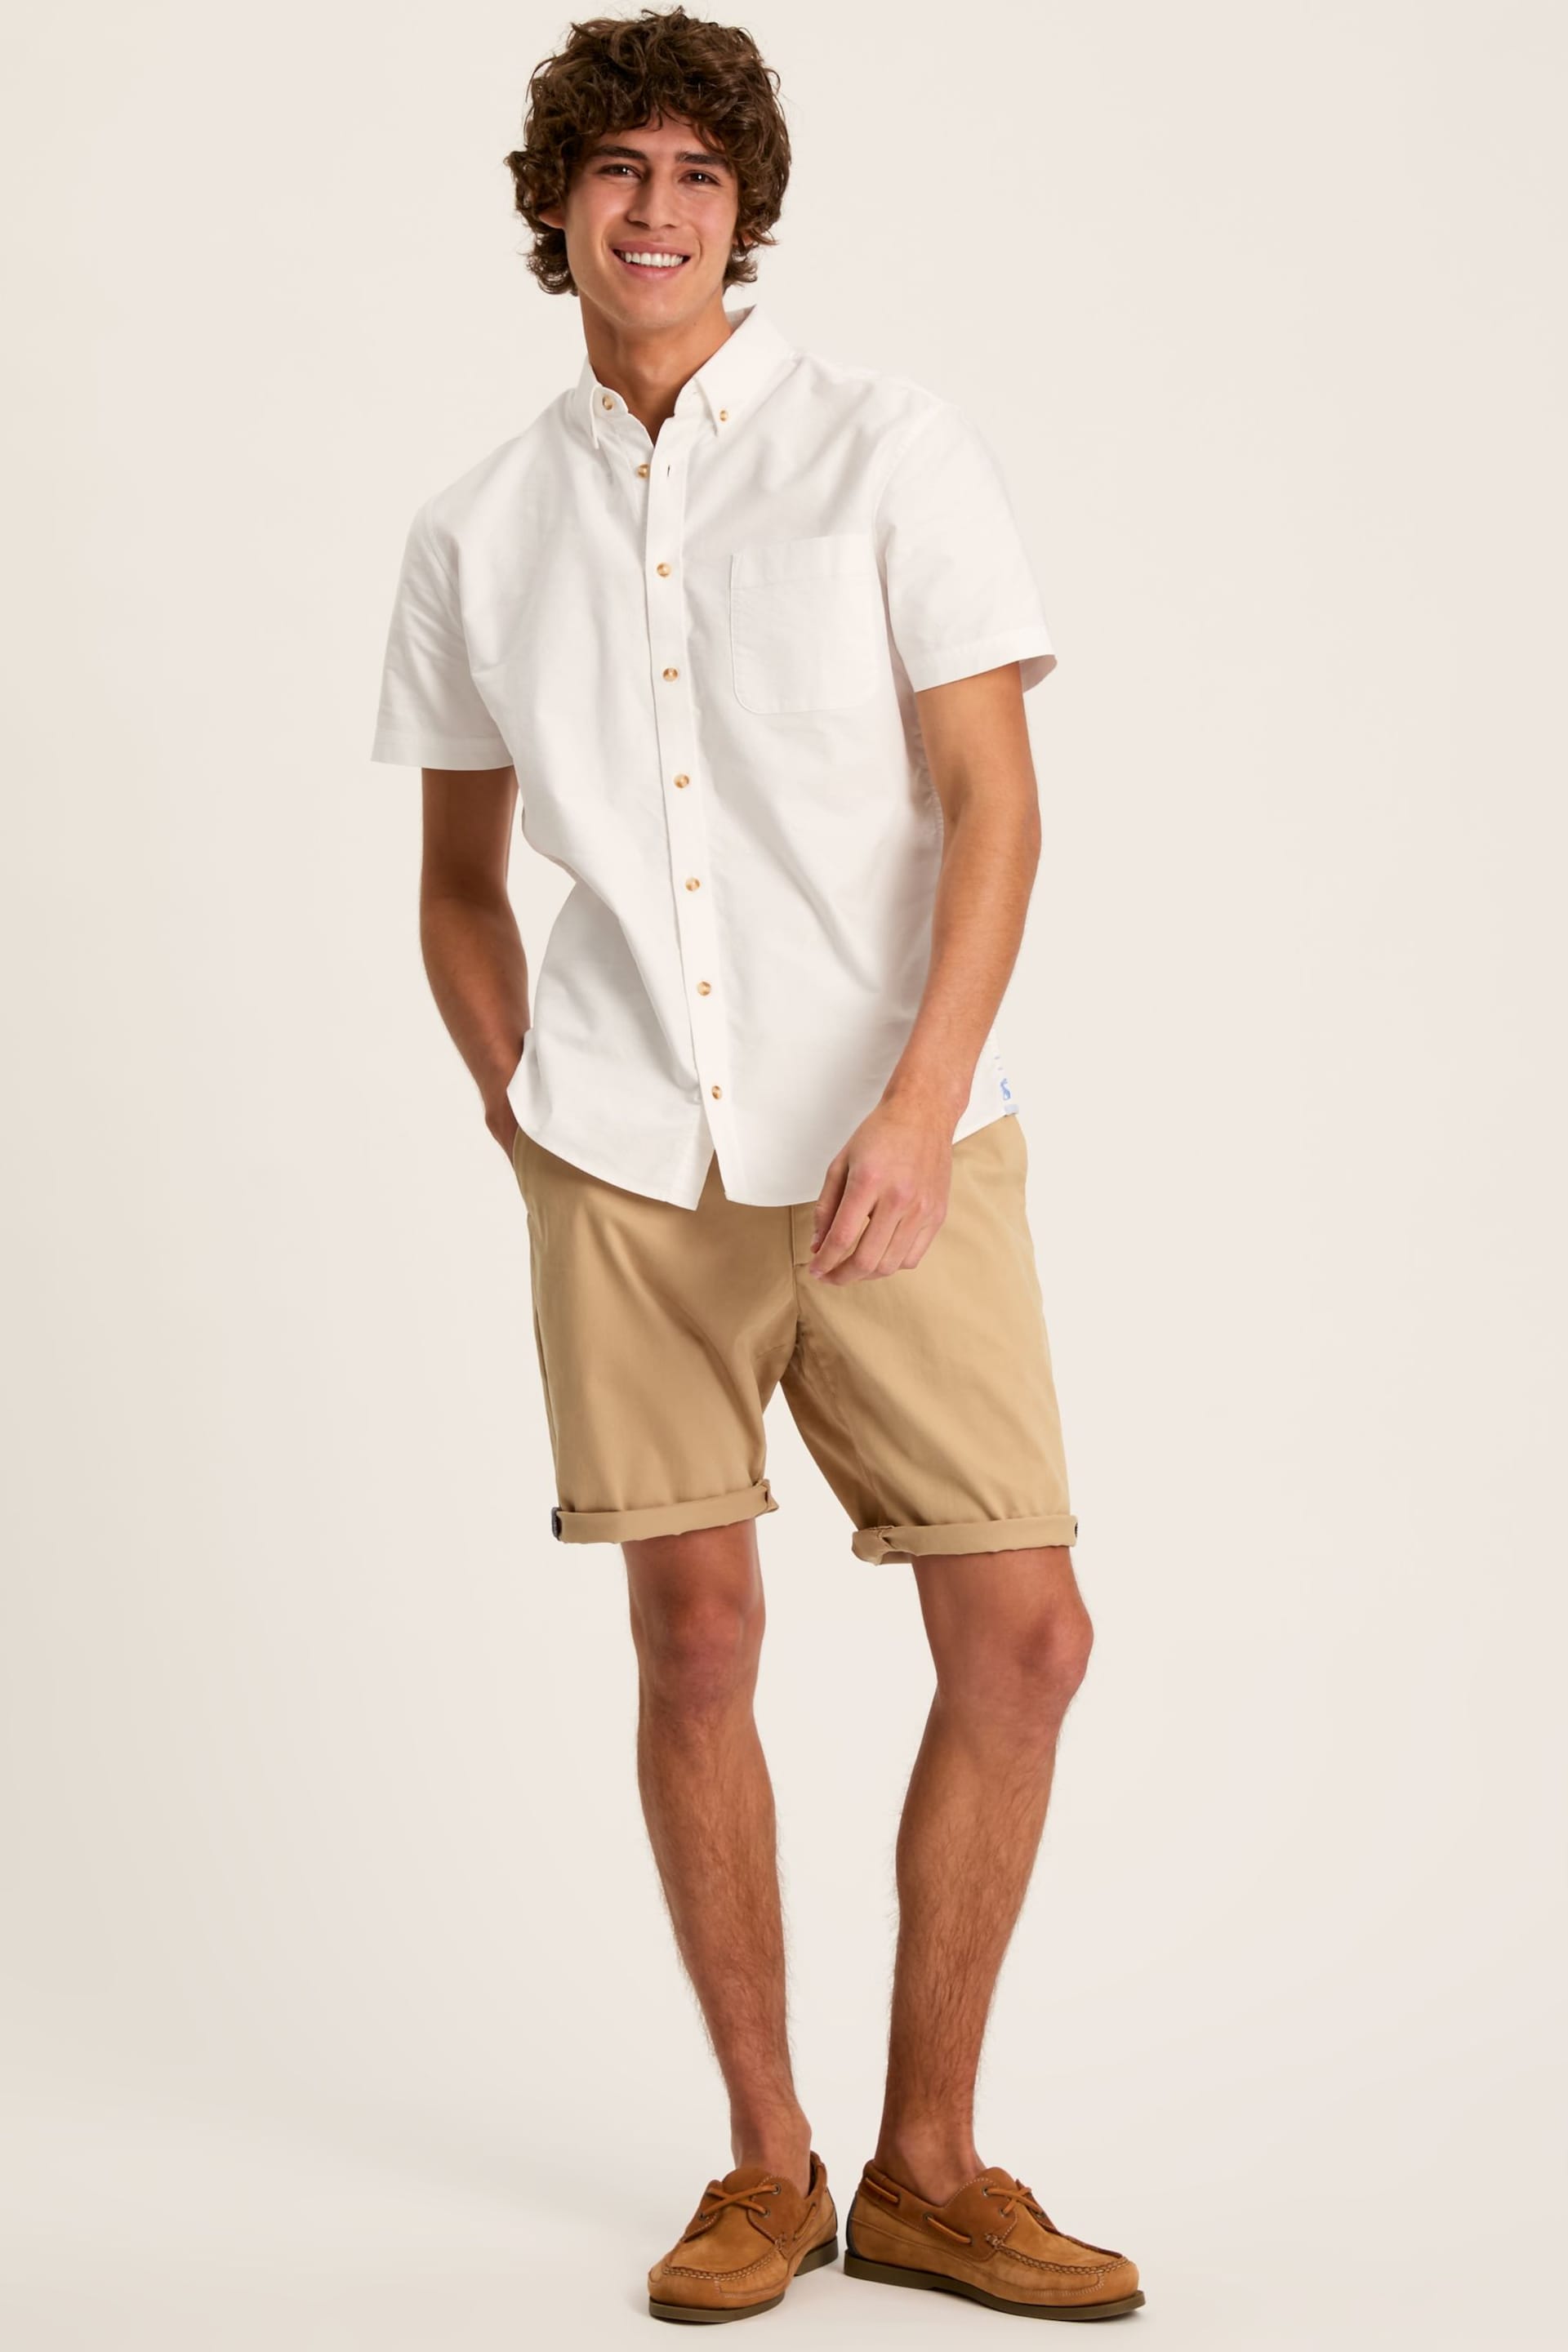 Joules Oxford White Short Sleeve Classic Fit Shirt - Image 3 of 7